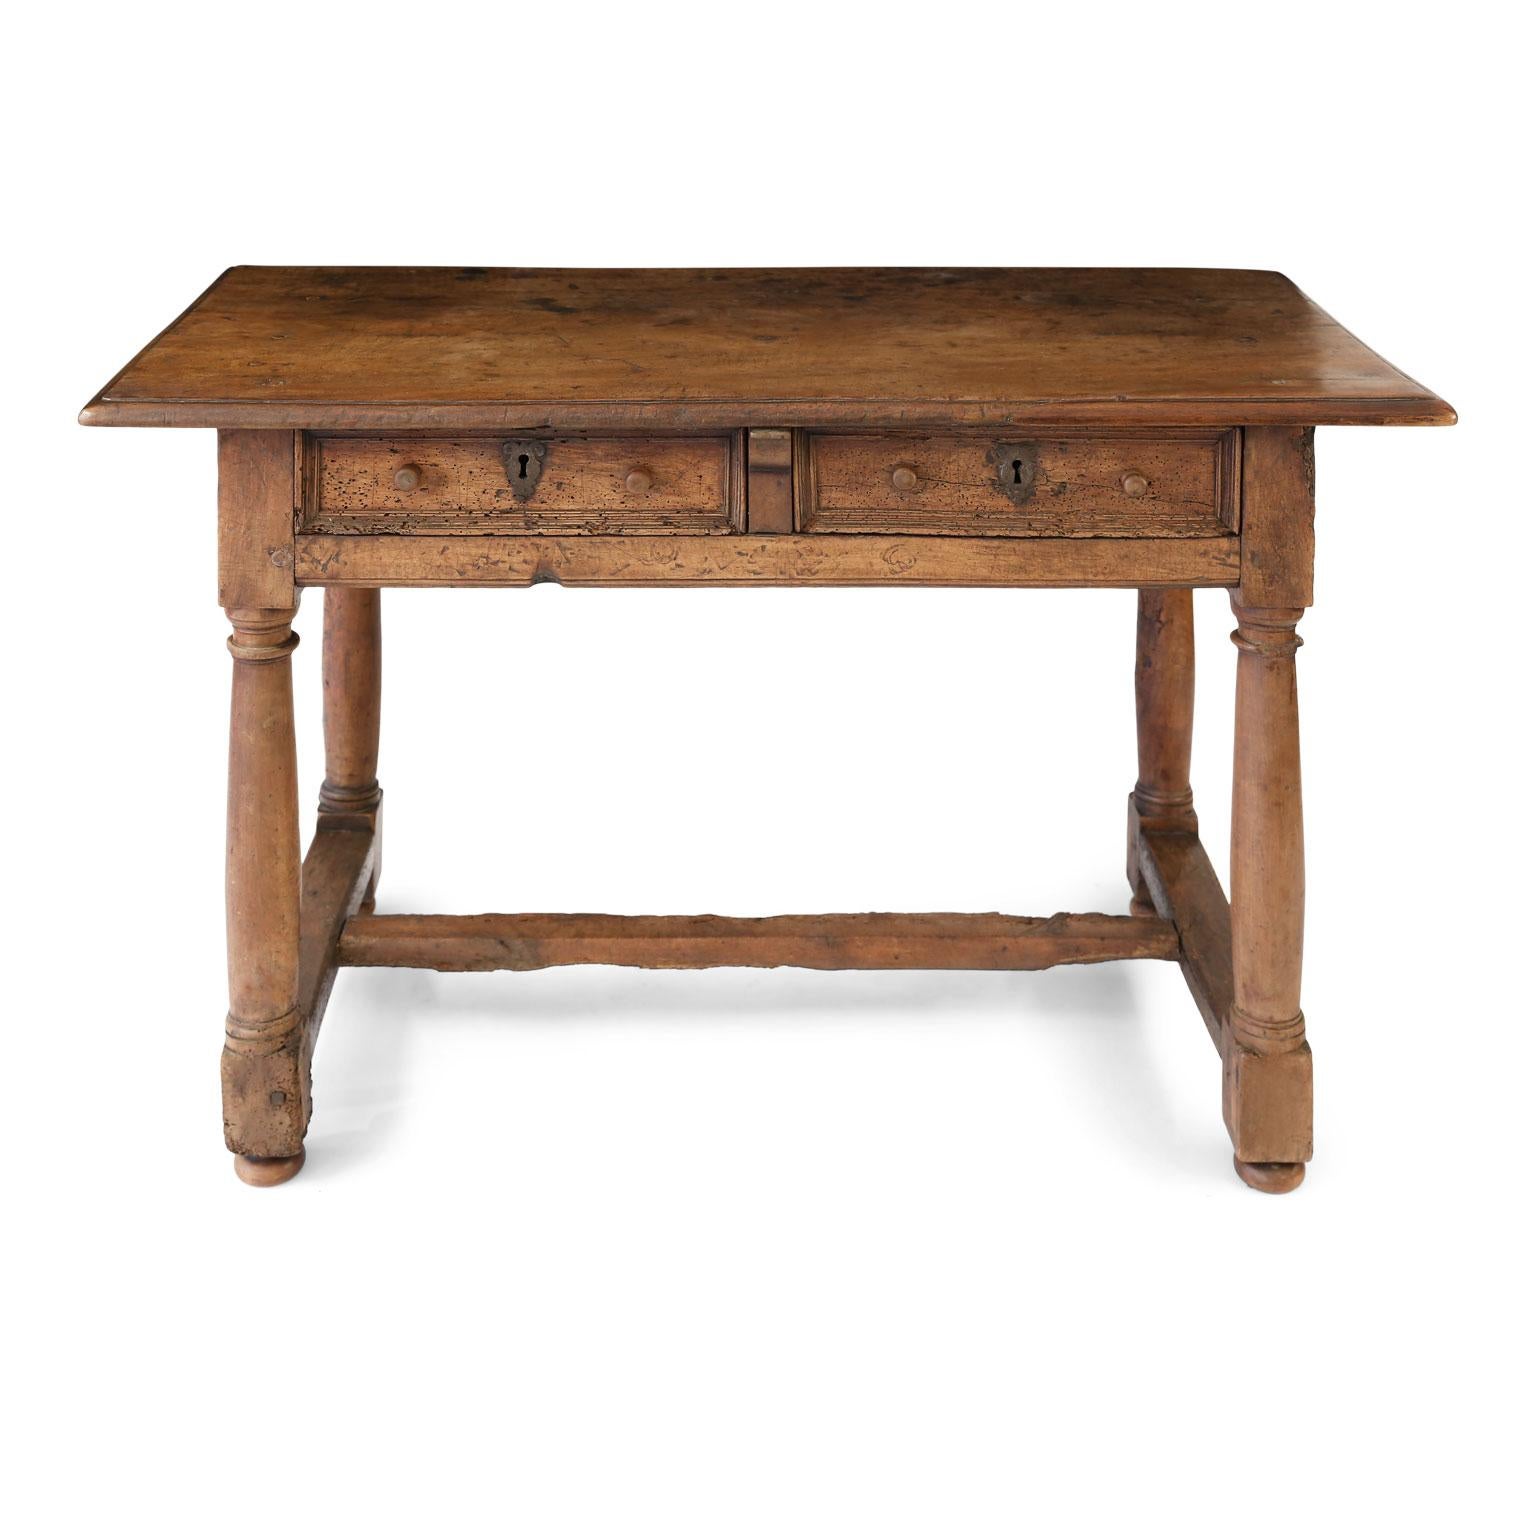 Early French walnut table with mortise and tenon construction. Past restorations, expected evidence of worm damage (newly fumigated) and recent tightening of joints. Very stable, sturdy. Beautiful patina. Hand-chiseled sunken relief decoration